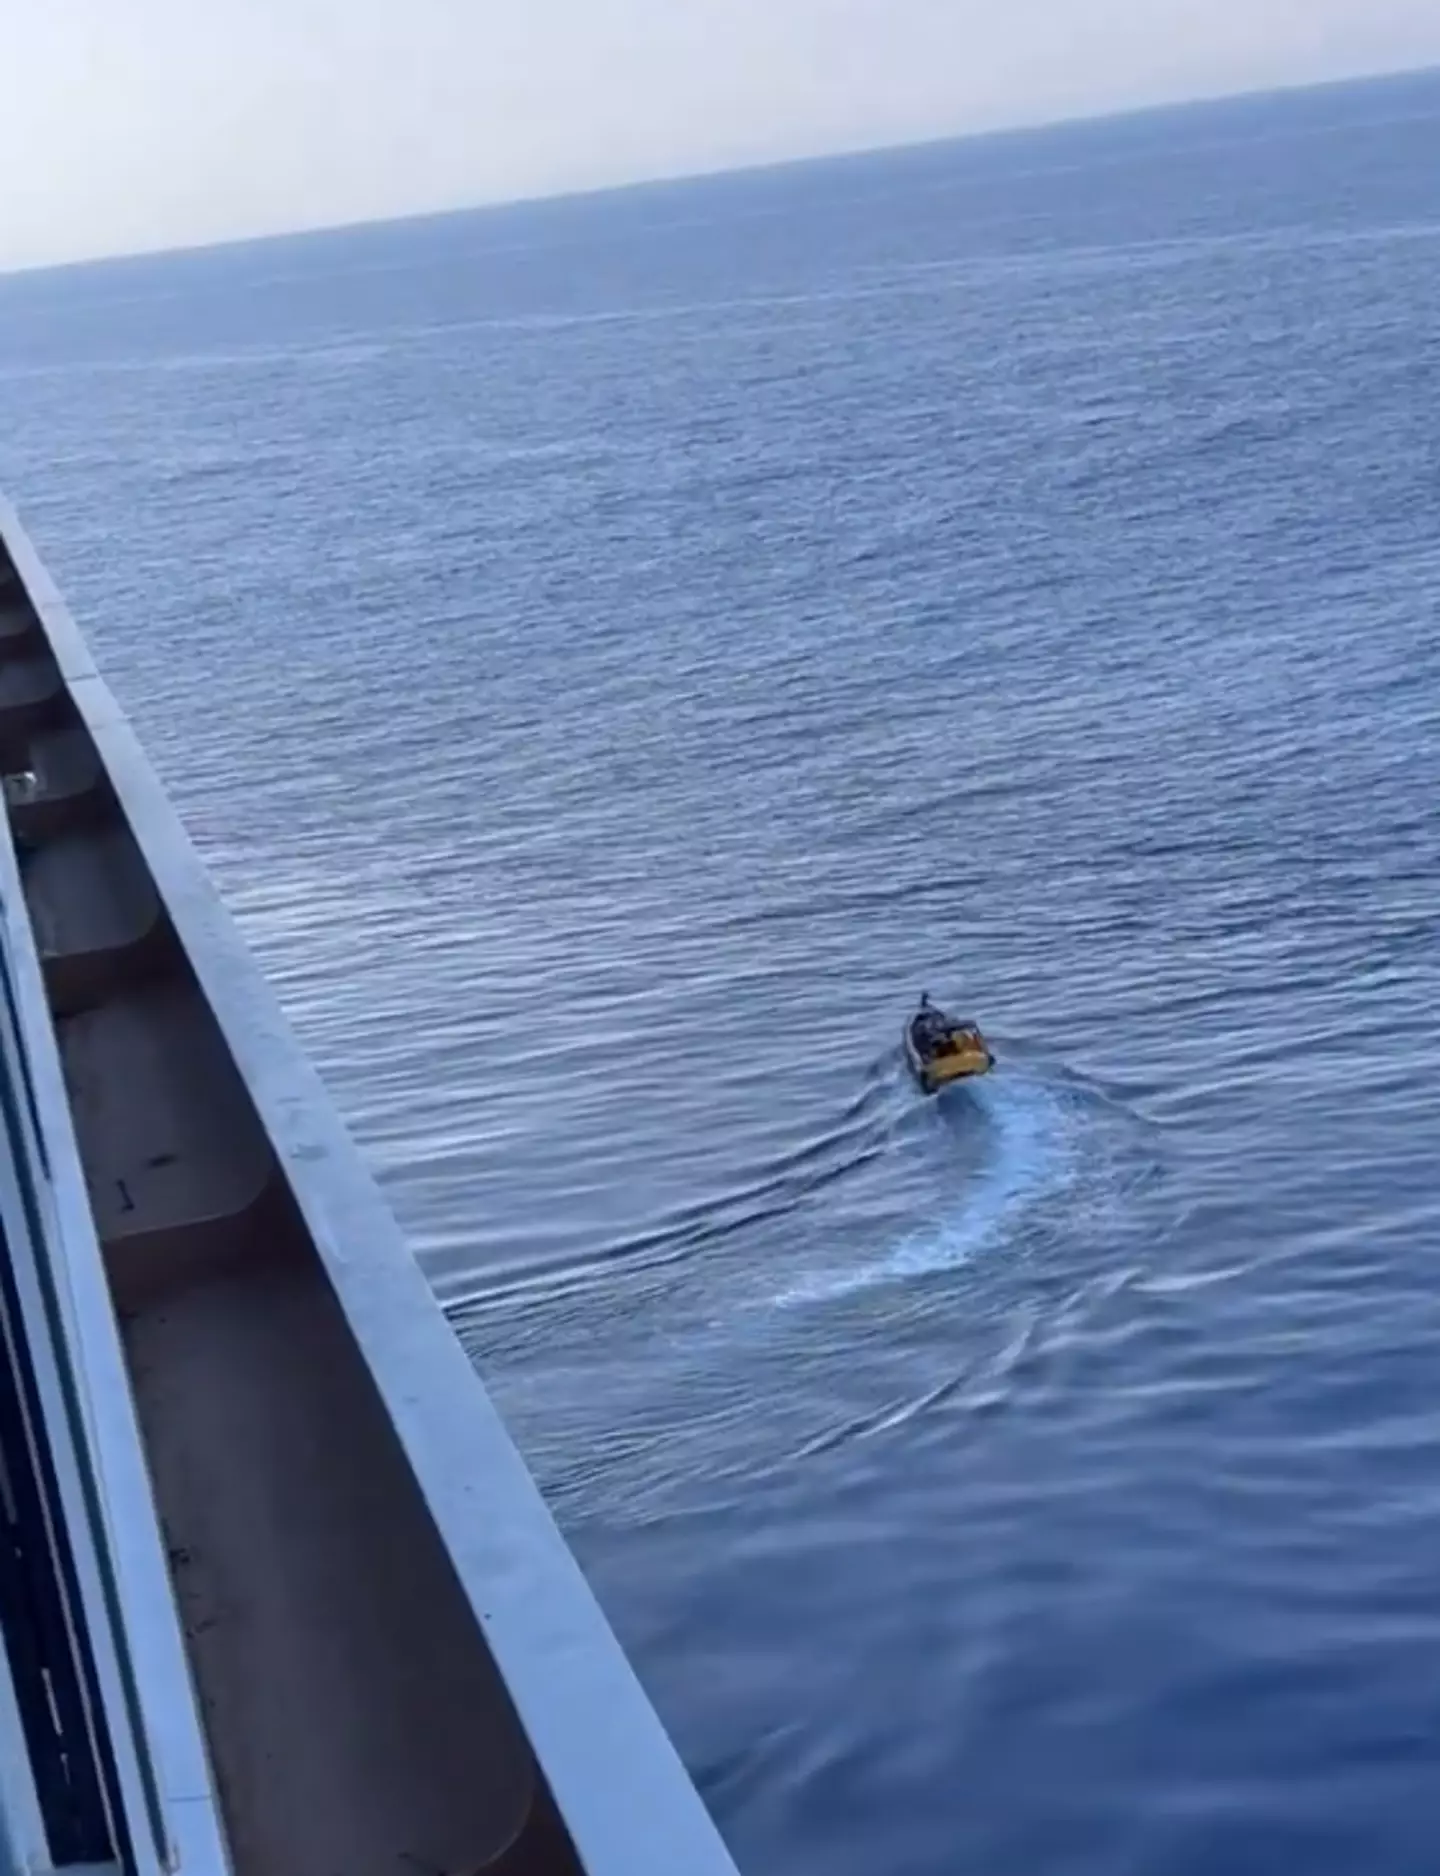 Passengers shared videos of a search and rescue boat going out to find the man (X/ @GenAIChad)